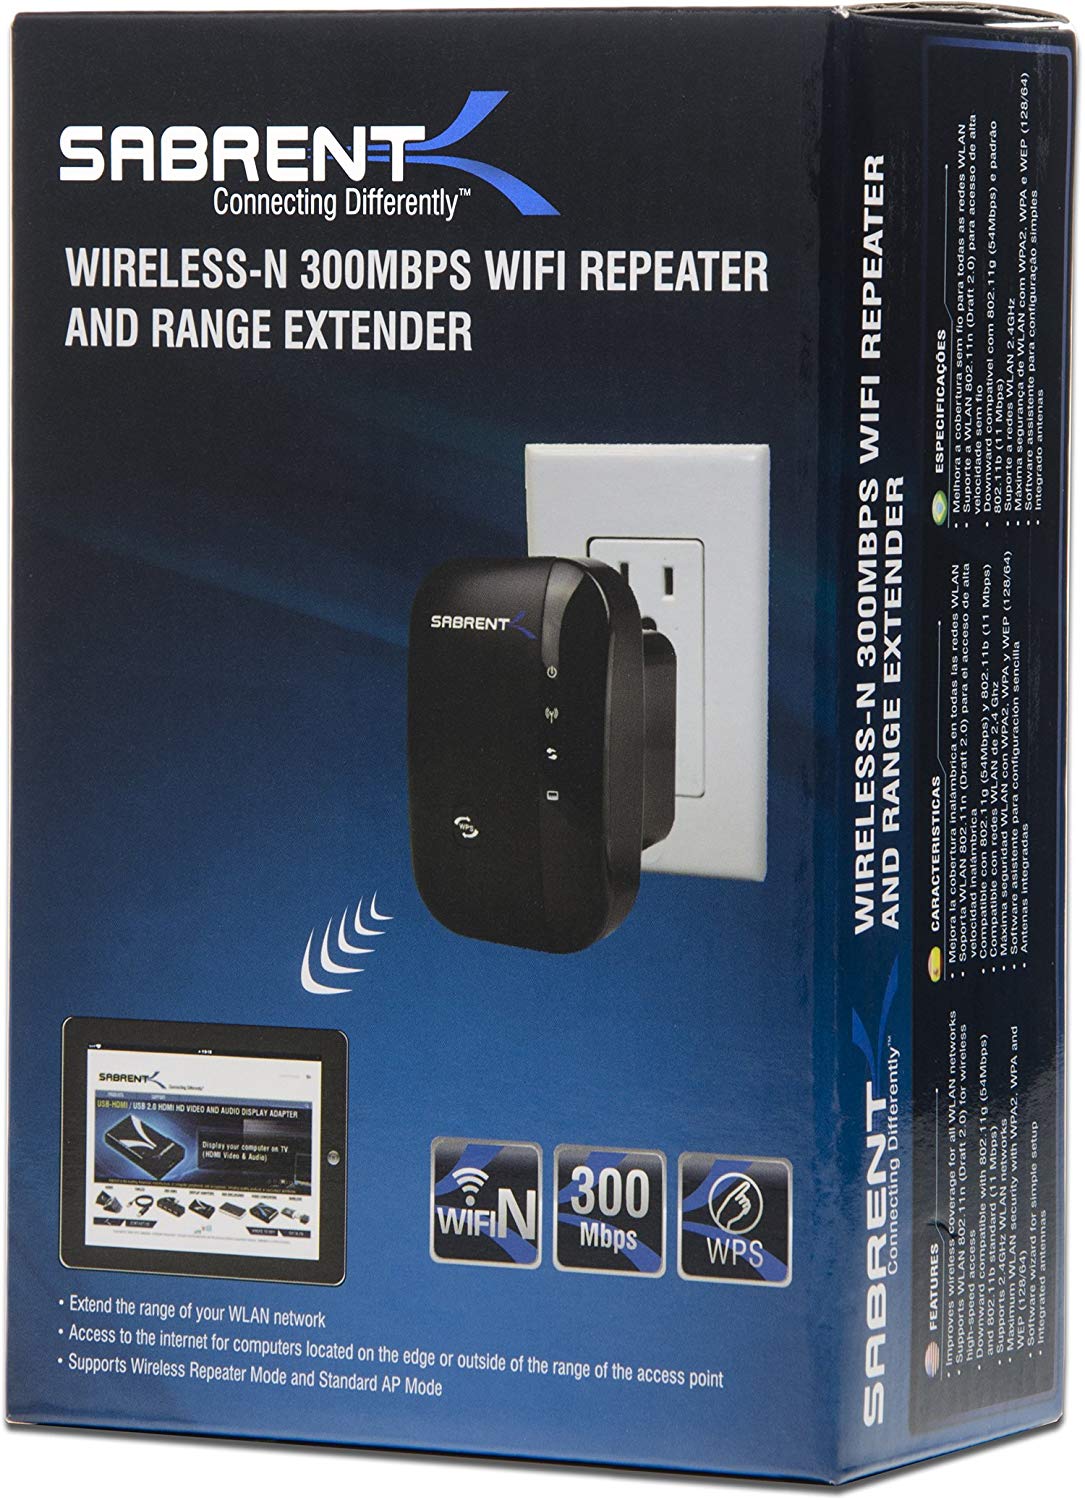 Wi-Fi Repeater and Range Extender 300mbps 2.4GHZ Wall Plug Ver - Sabrent